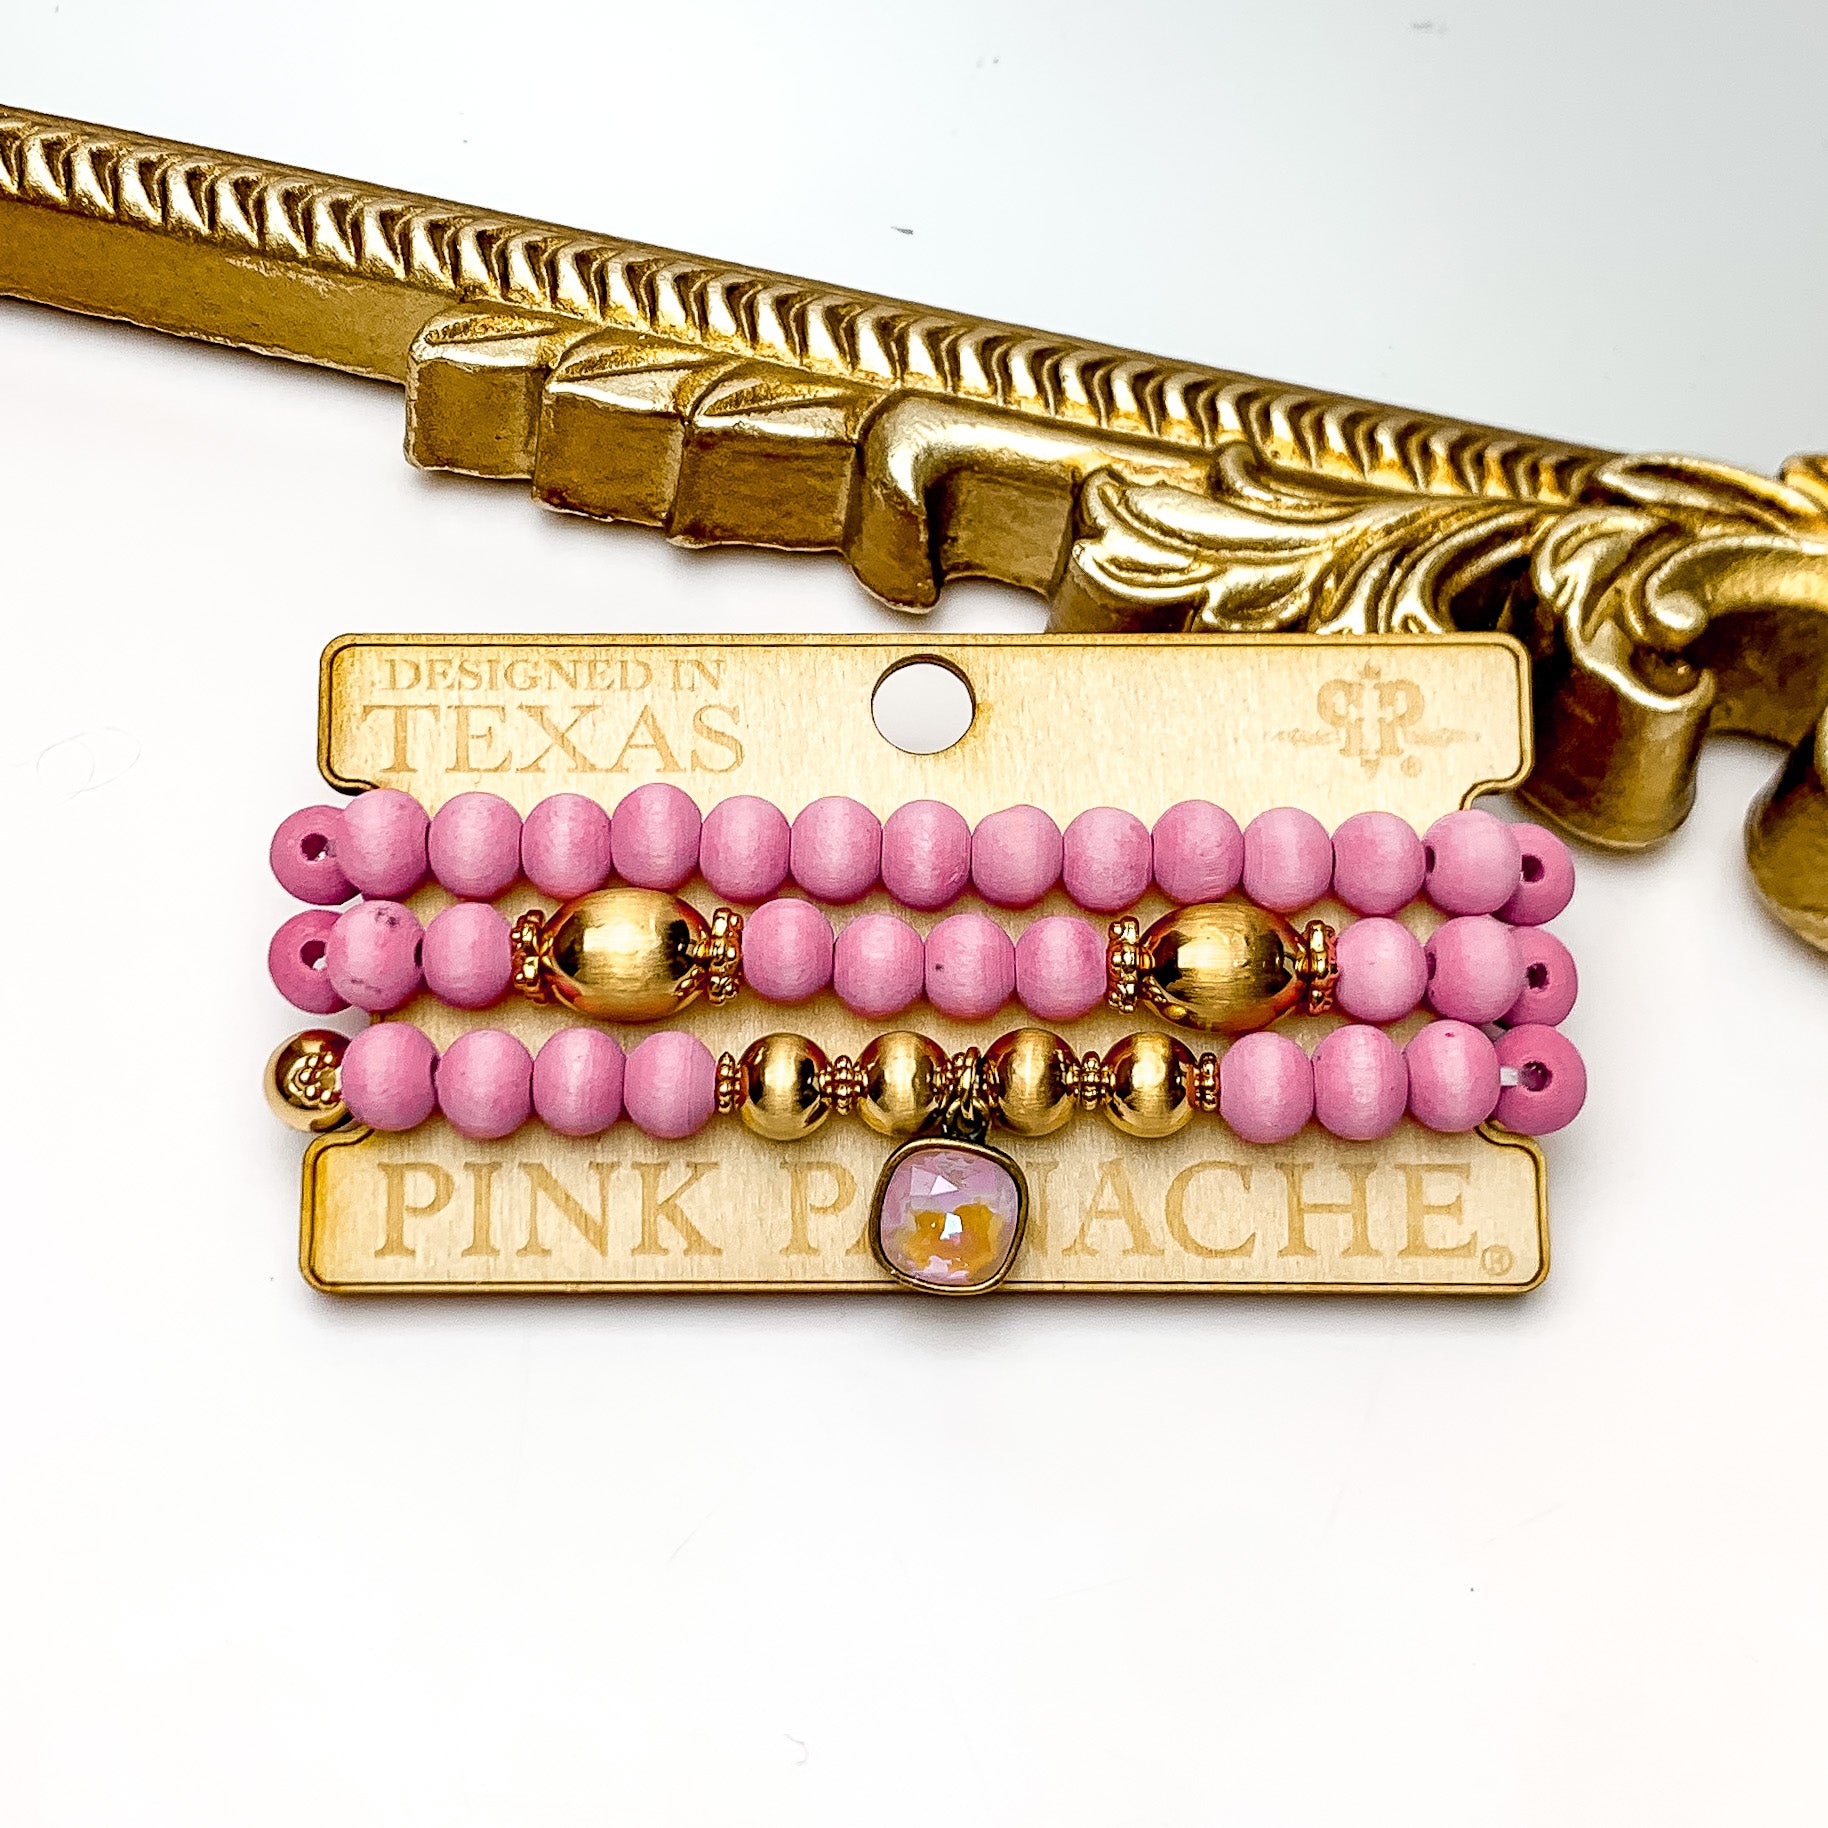 Pink Panache Three Strand Pink Wood and Gold Beaded Bracelet With a Dusty Pink Cushion Cut Drop. Pictured on a white background with the top of the bracelets laying against a gold trim frame.